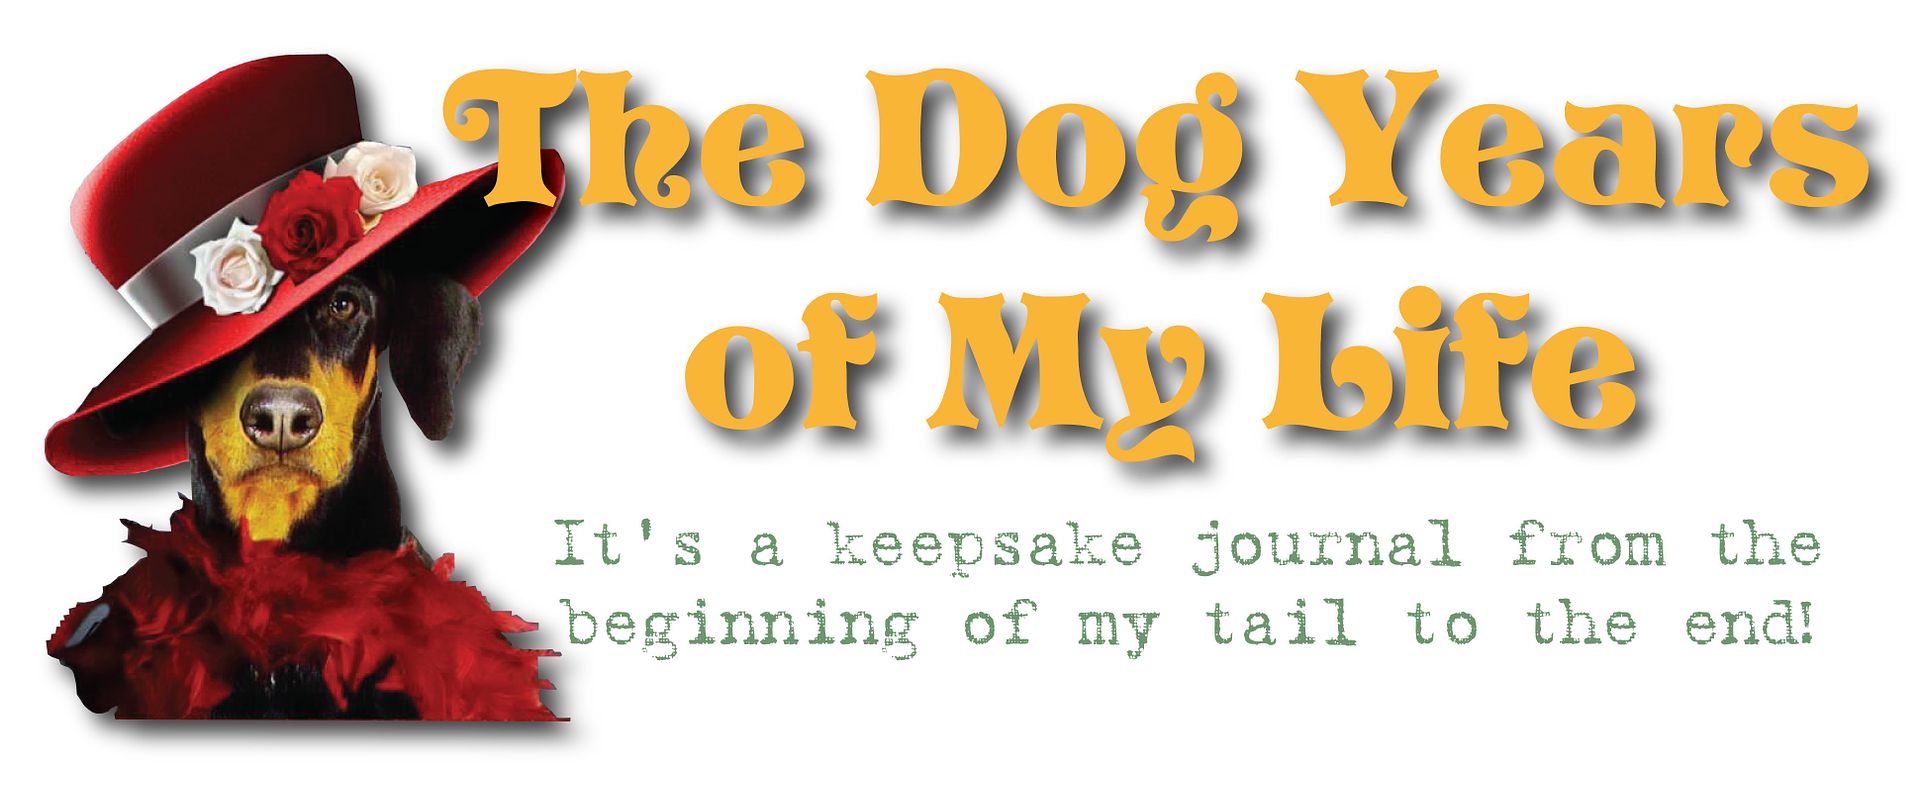 The Dog Years Of My Life